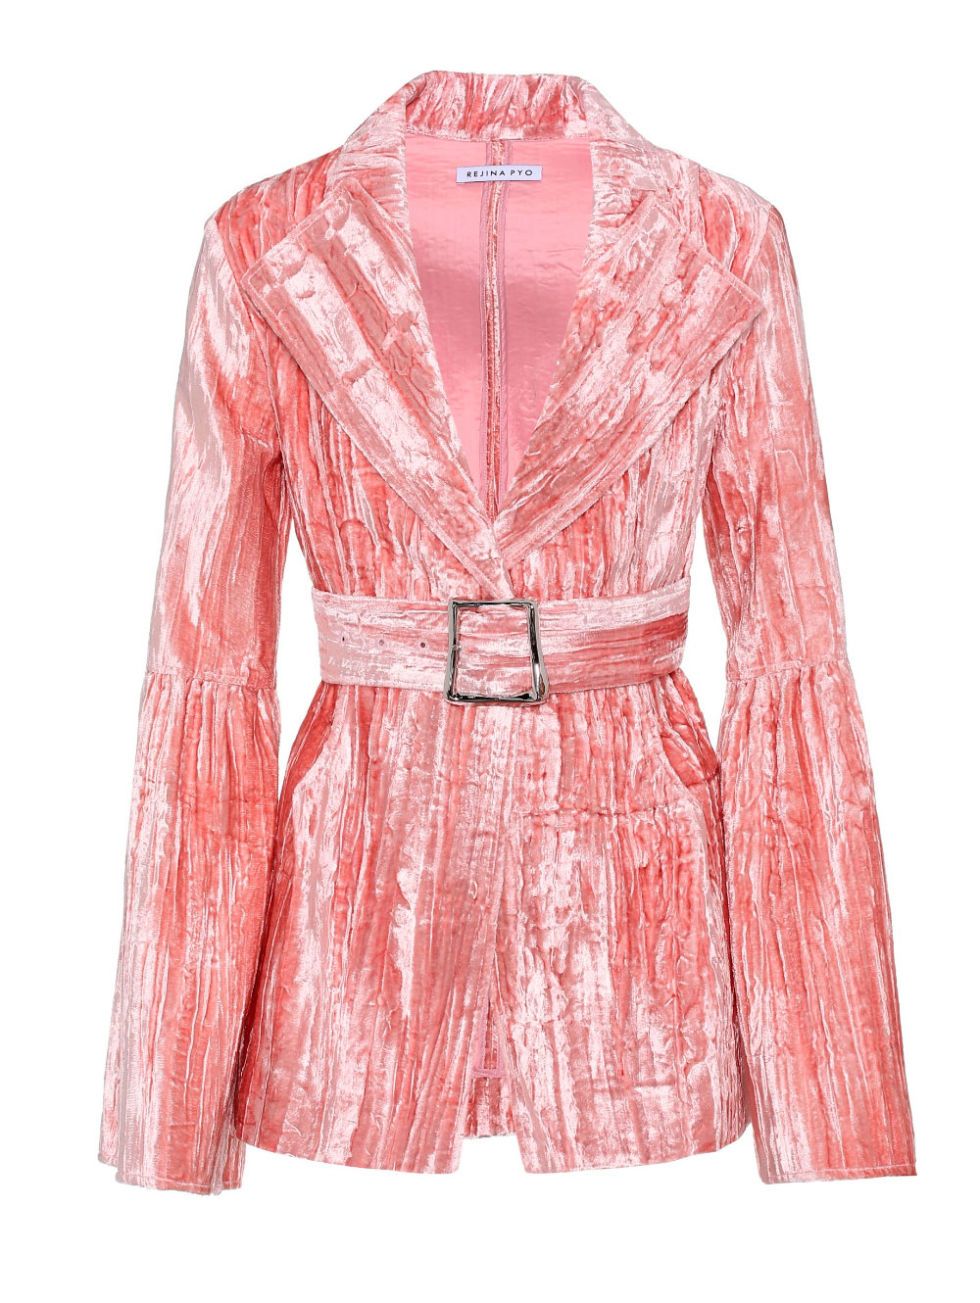 Clothing, Outerwear, Pink, Sleeve, Jacket, Blazer, Top, Neck, Robe, Blouse, 